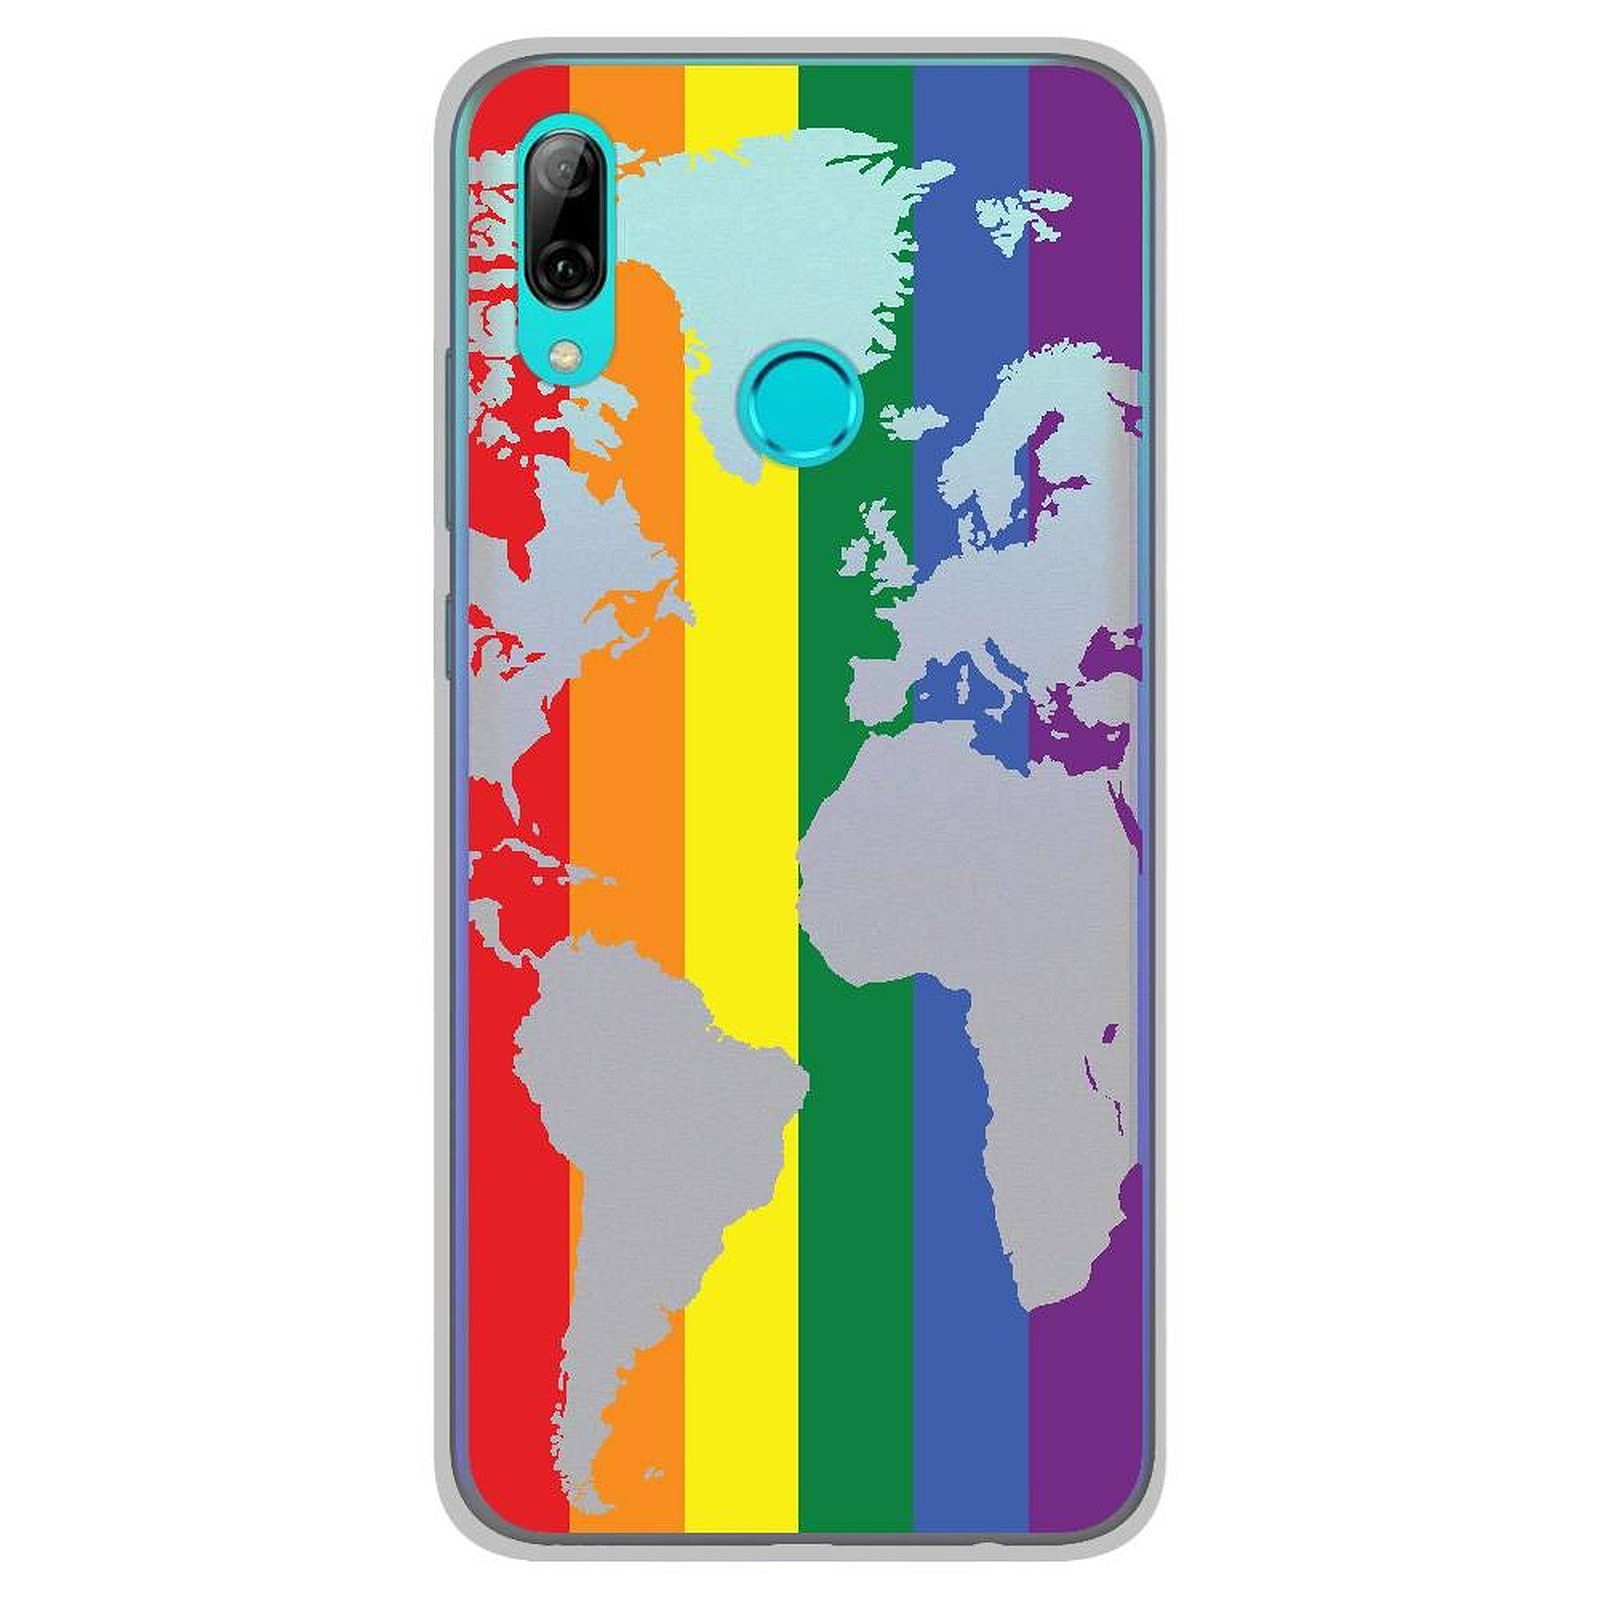 1001 Coques Coque silicone gel Huawei P Smart 2019 motif Map LGBT - Coque telephone 1001Coques